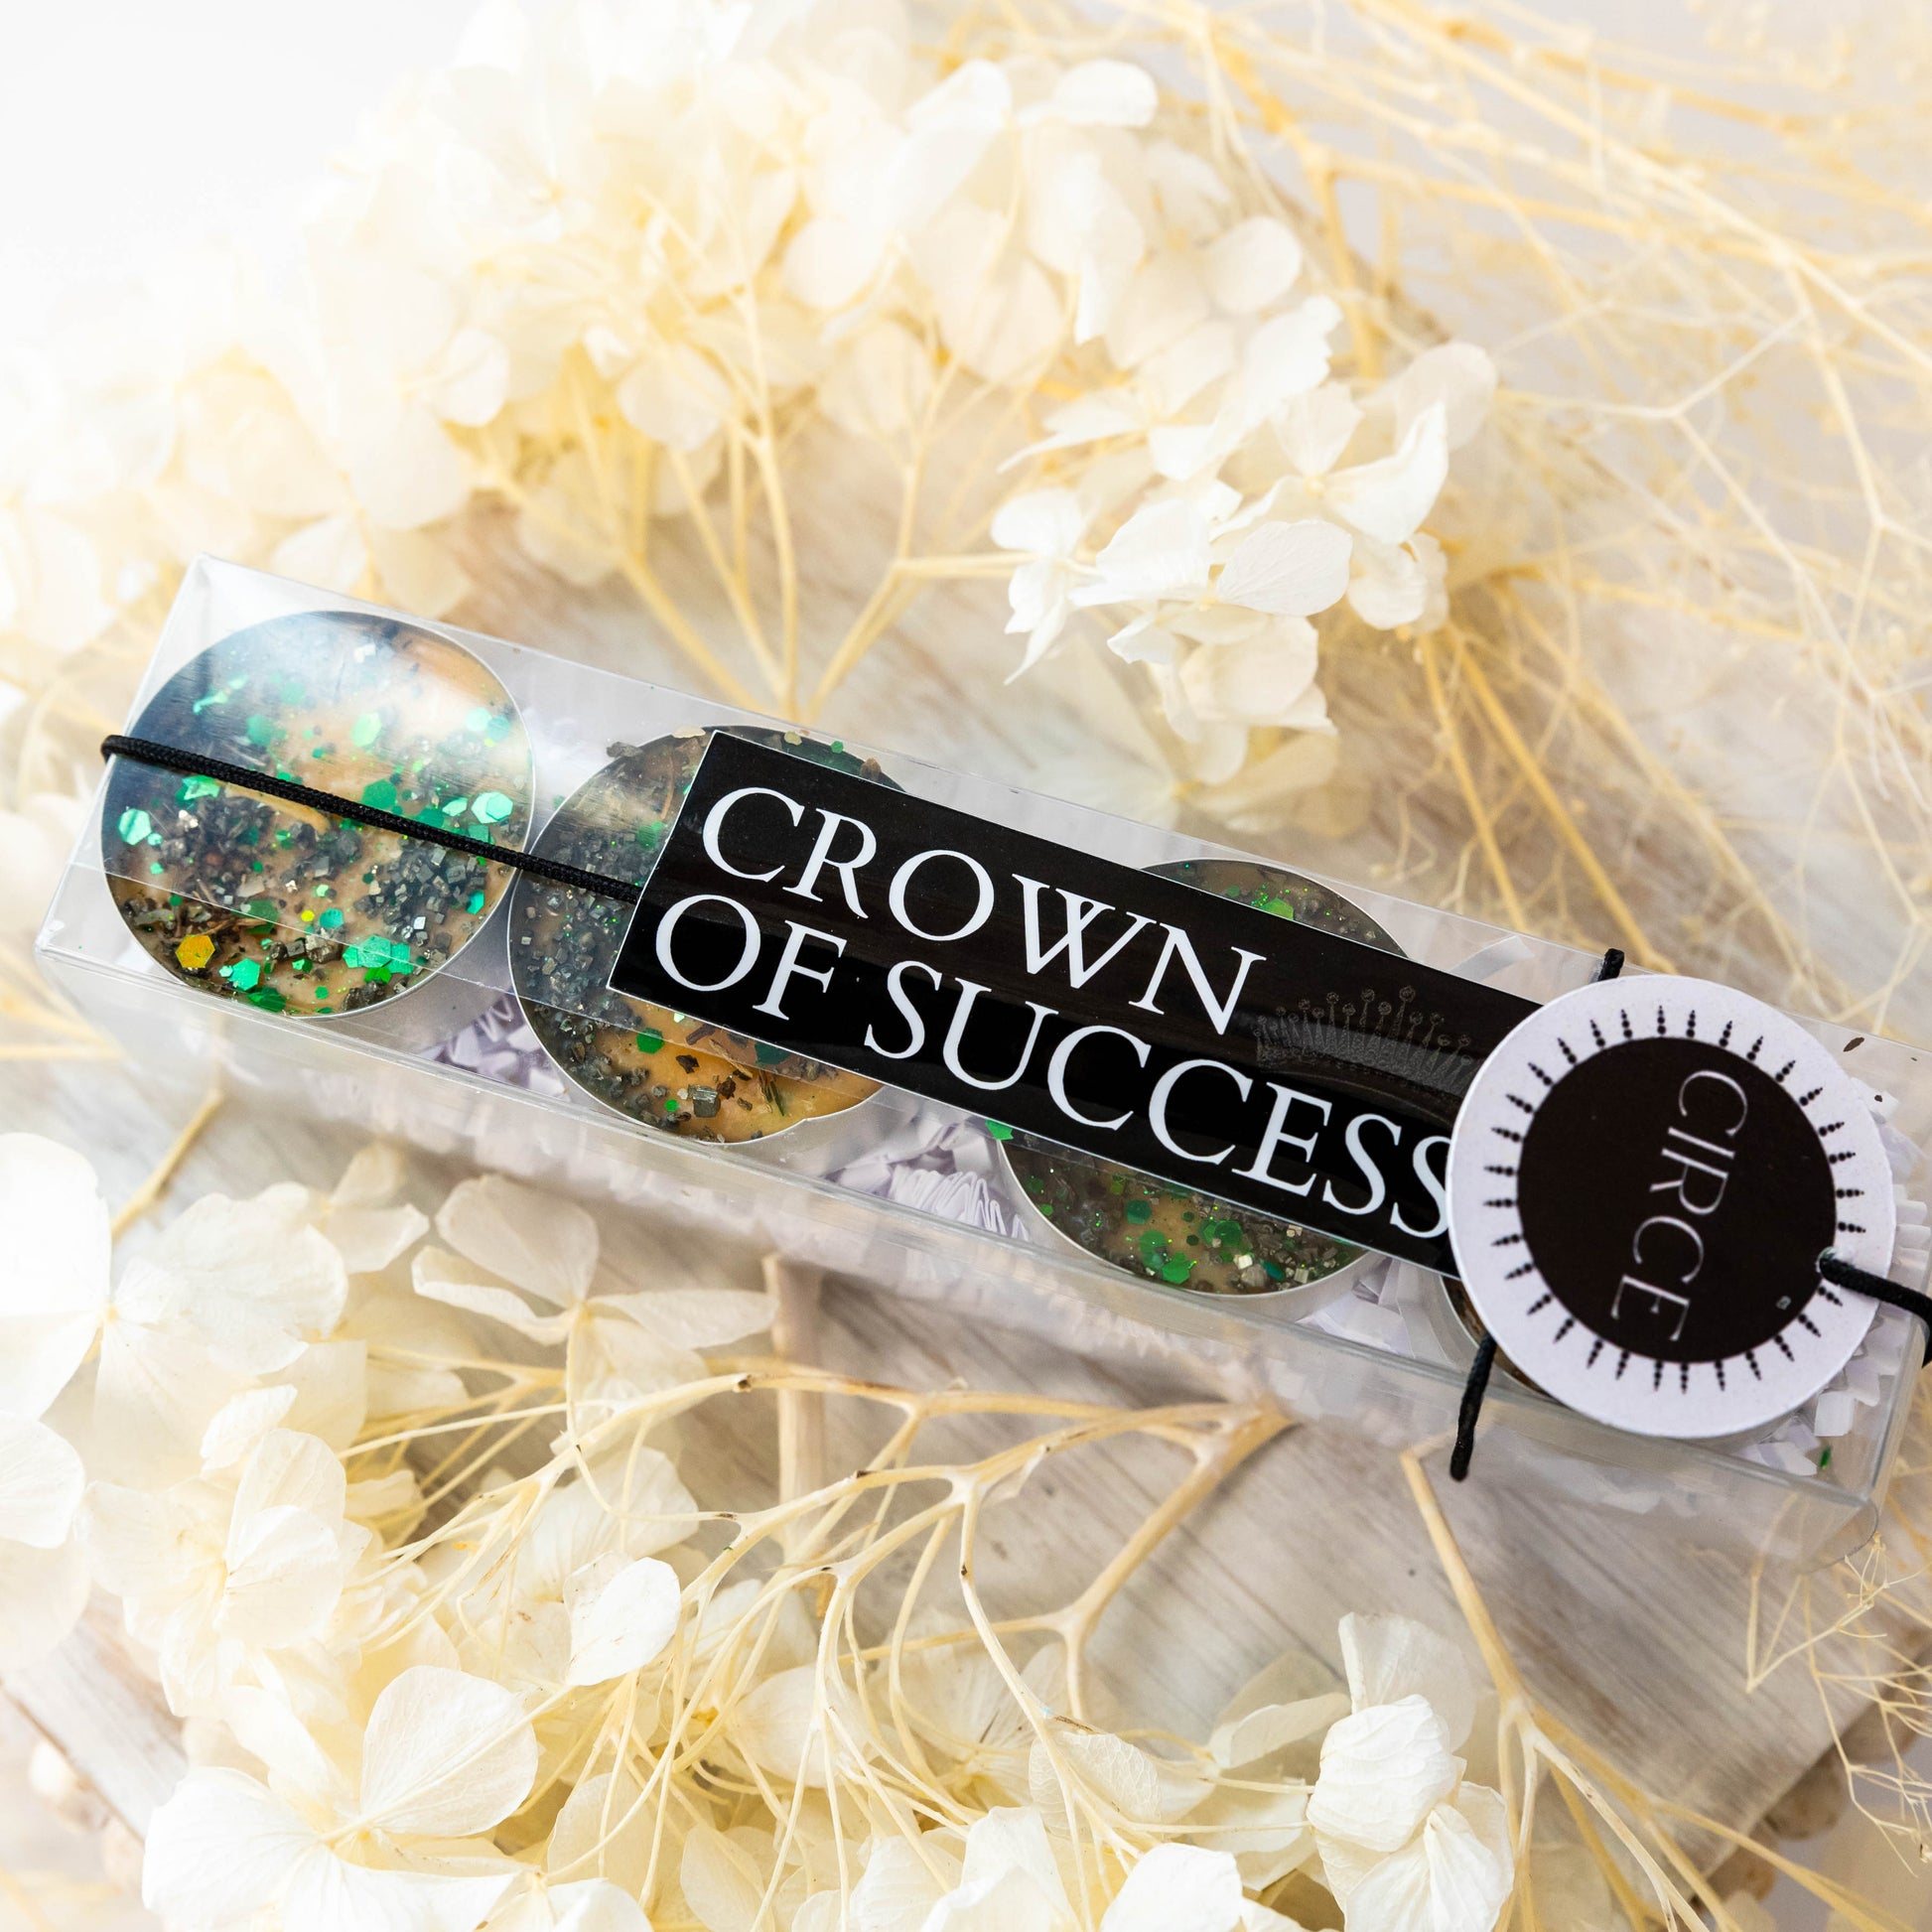 Crown of Success Spell Tealight Candles - Candles by CIRCE  from Circe Boutique